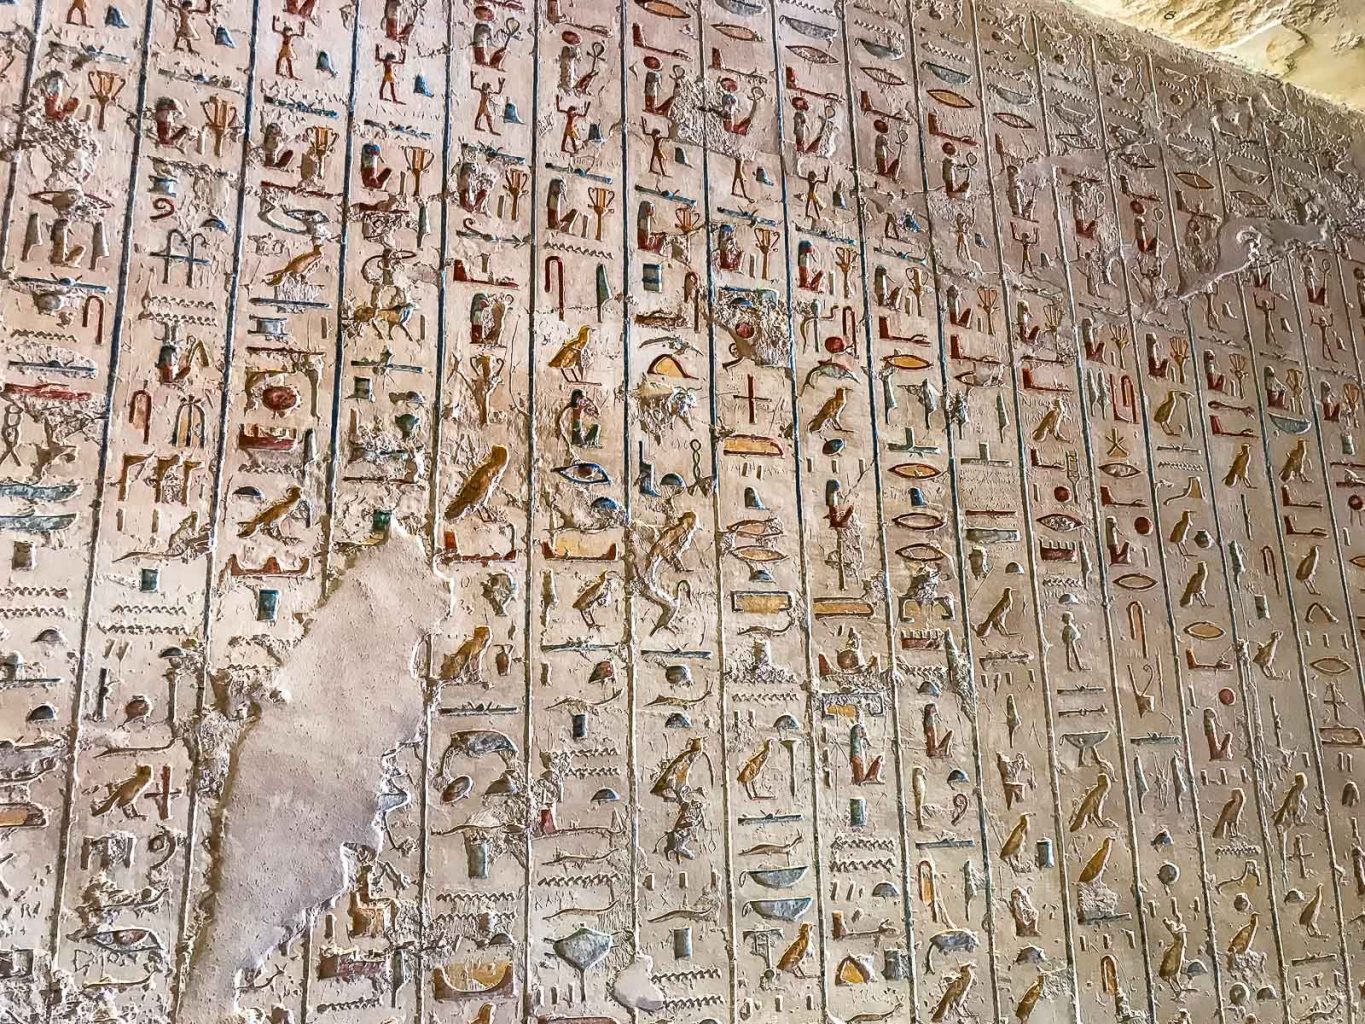 Colors in the tombs of the Valley of the Kings